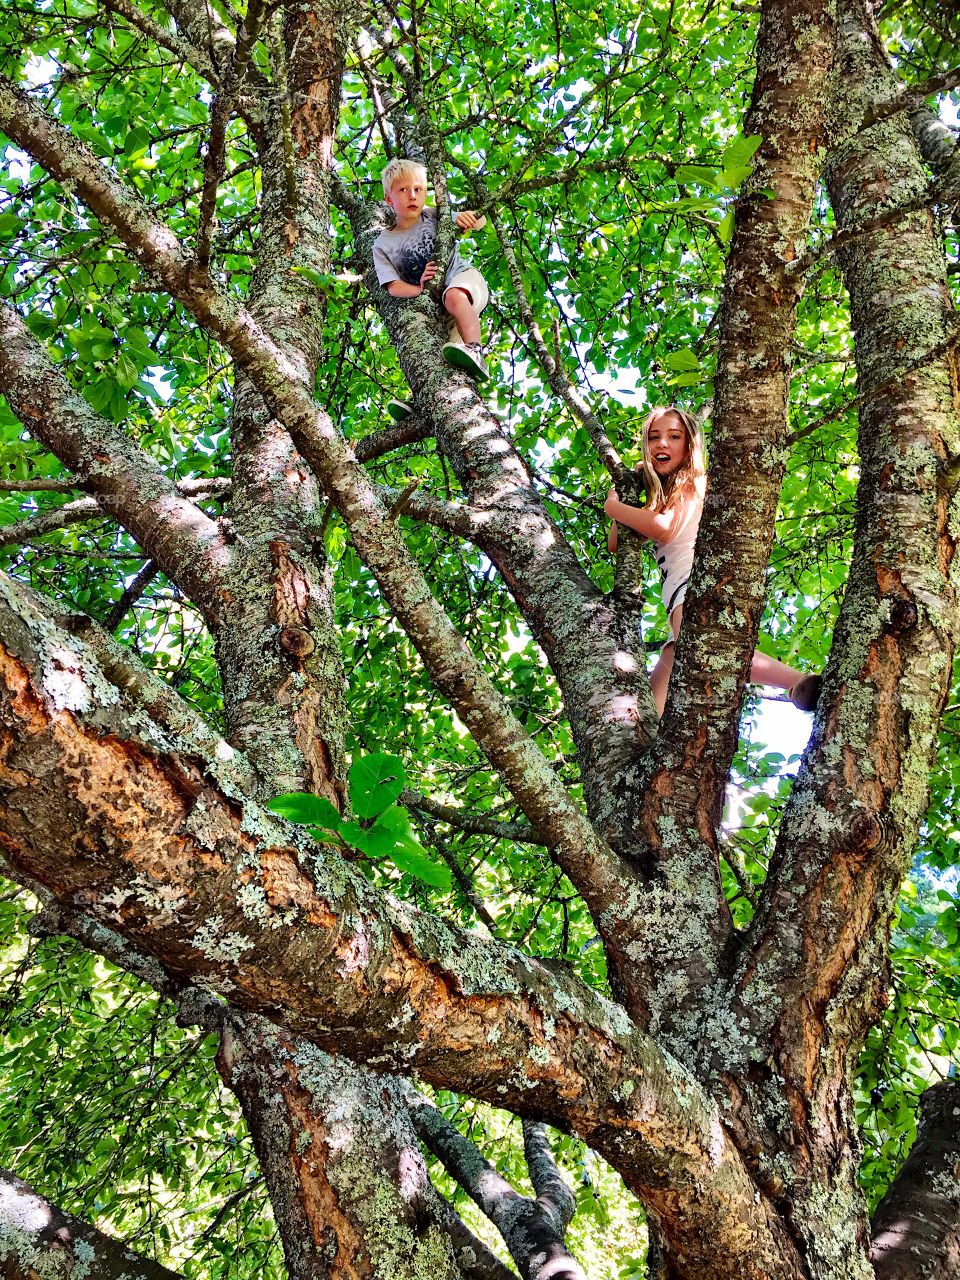 A young boy and girl climbing a tree